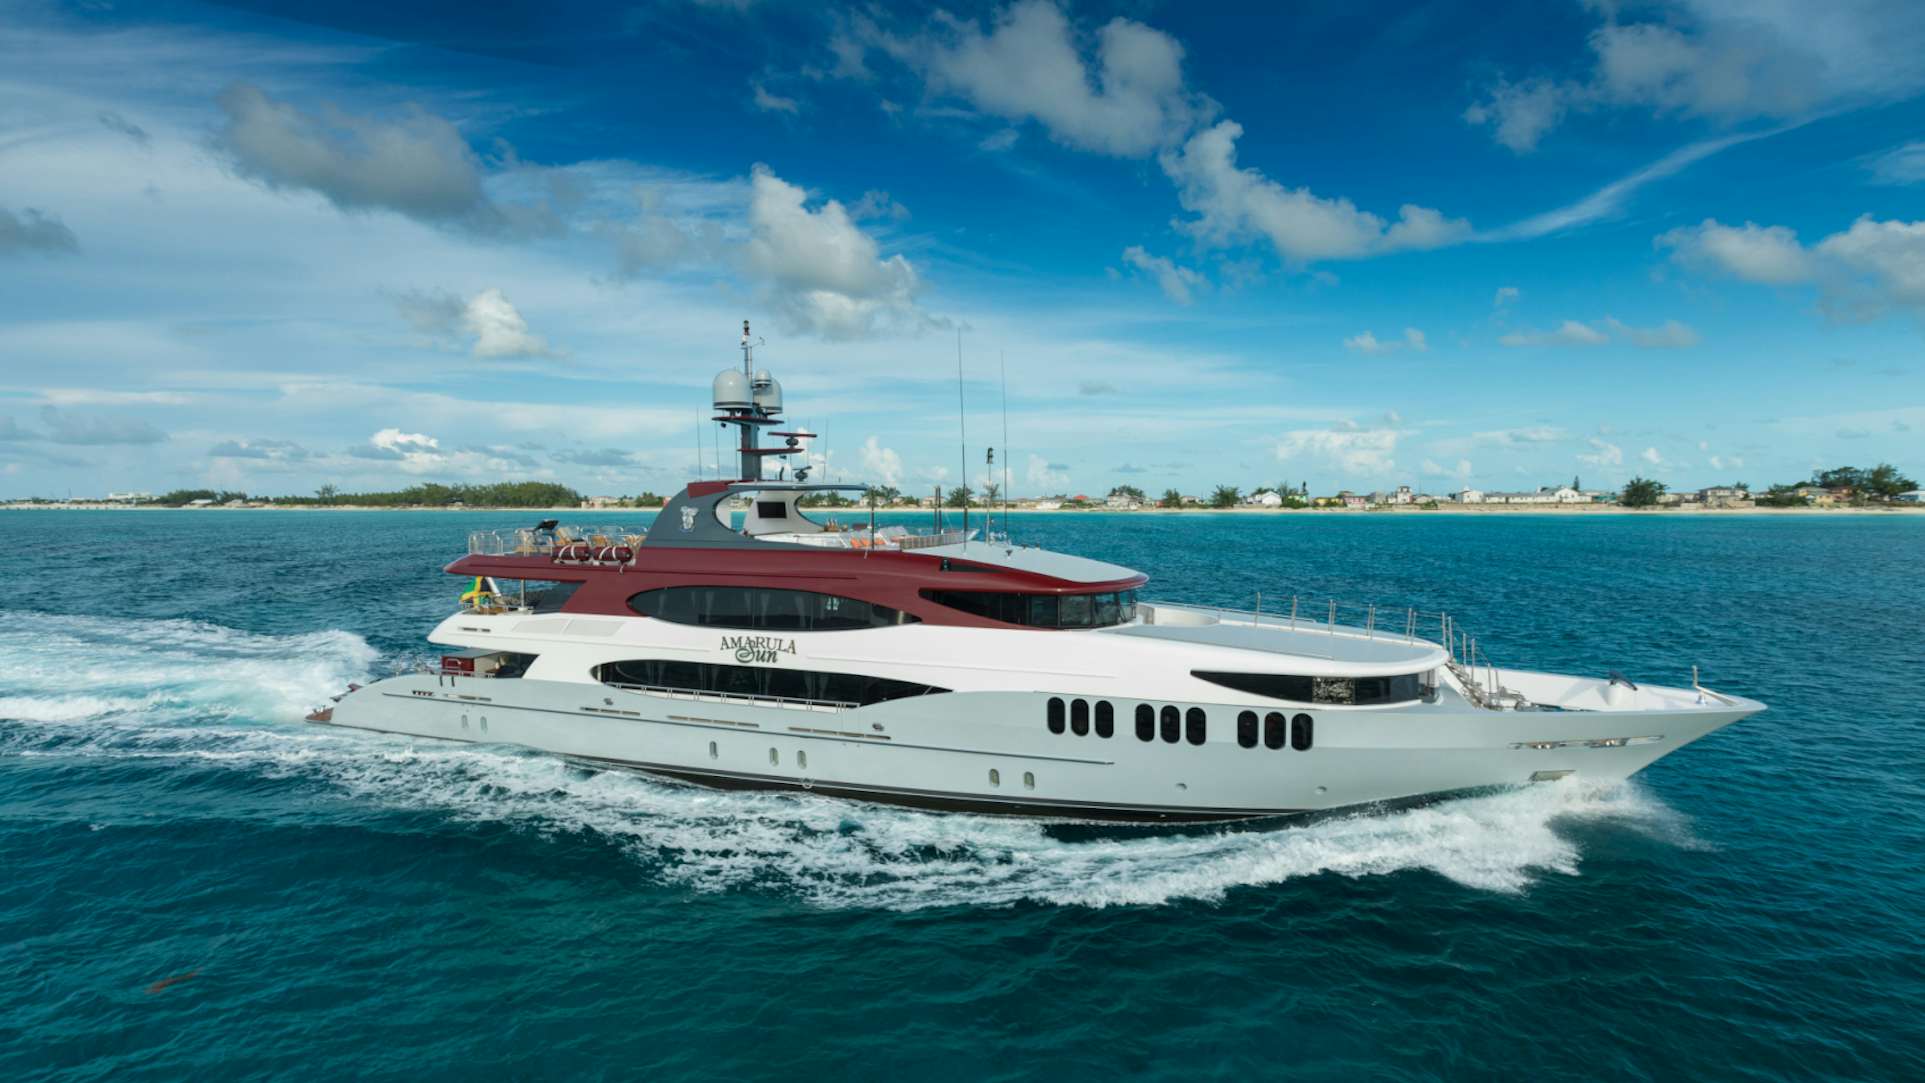 Watch Video for AMARULA SUN Yacht for Charter